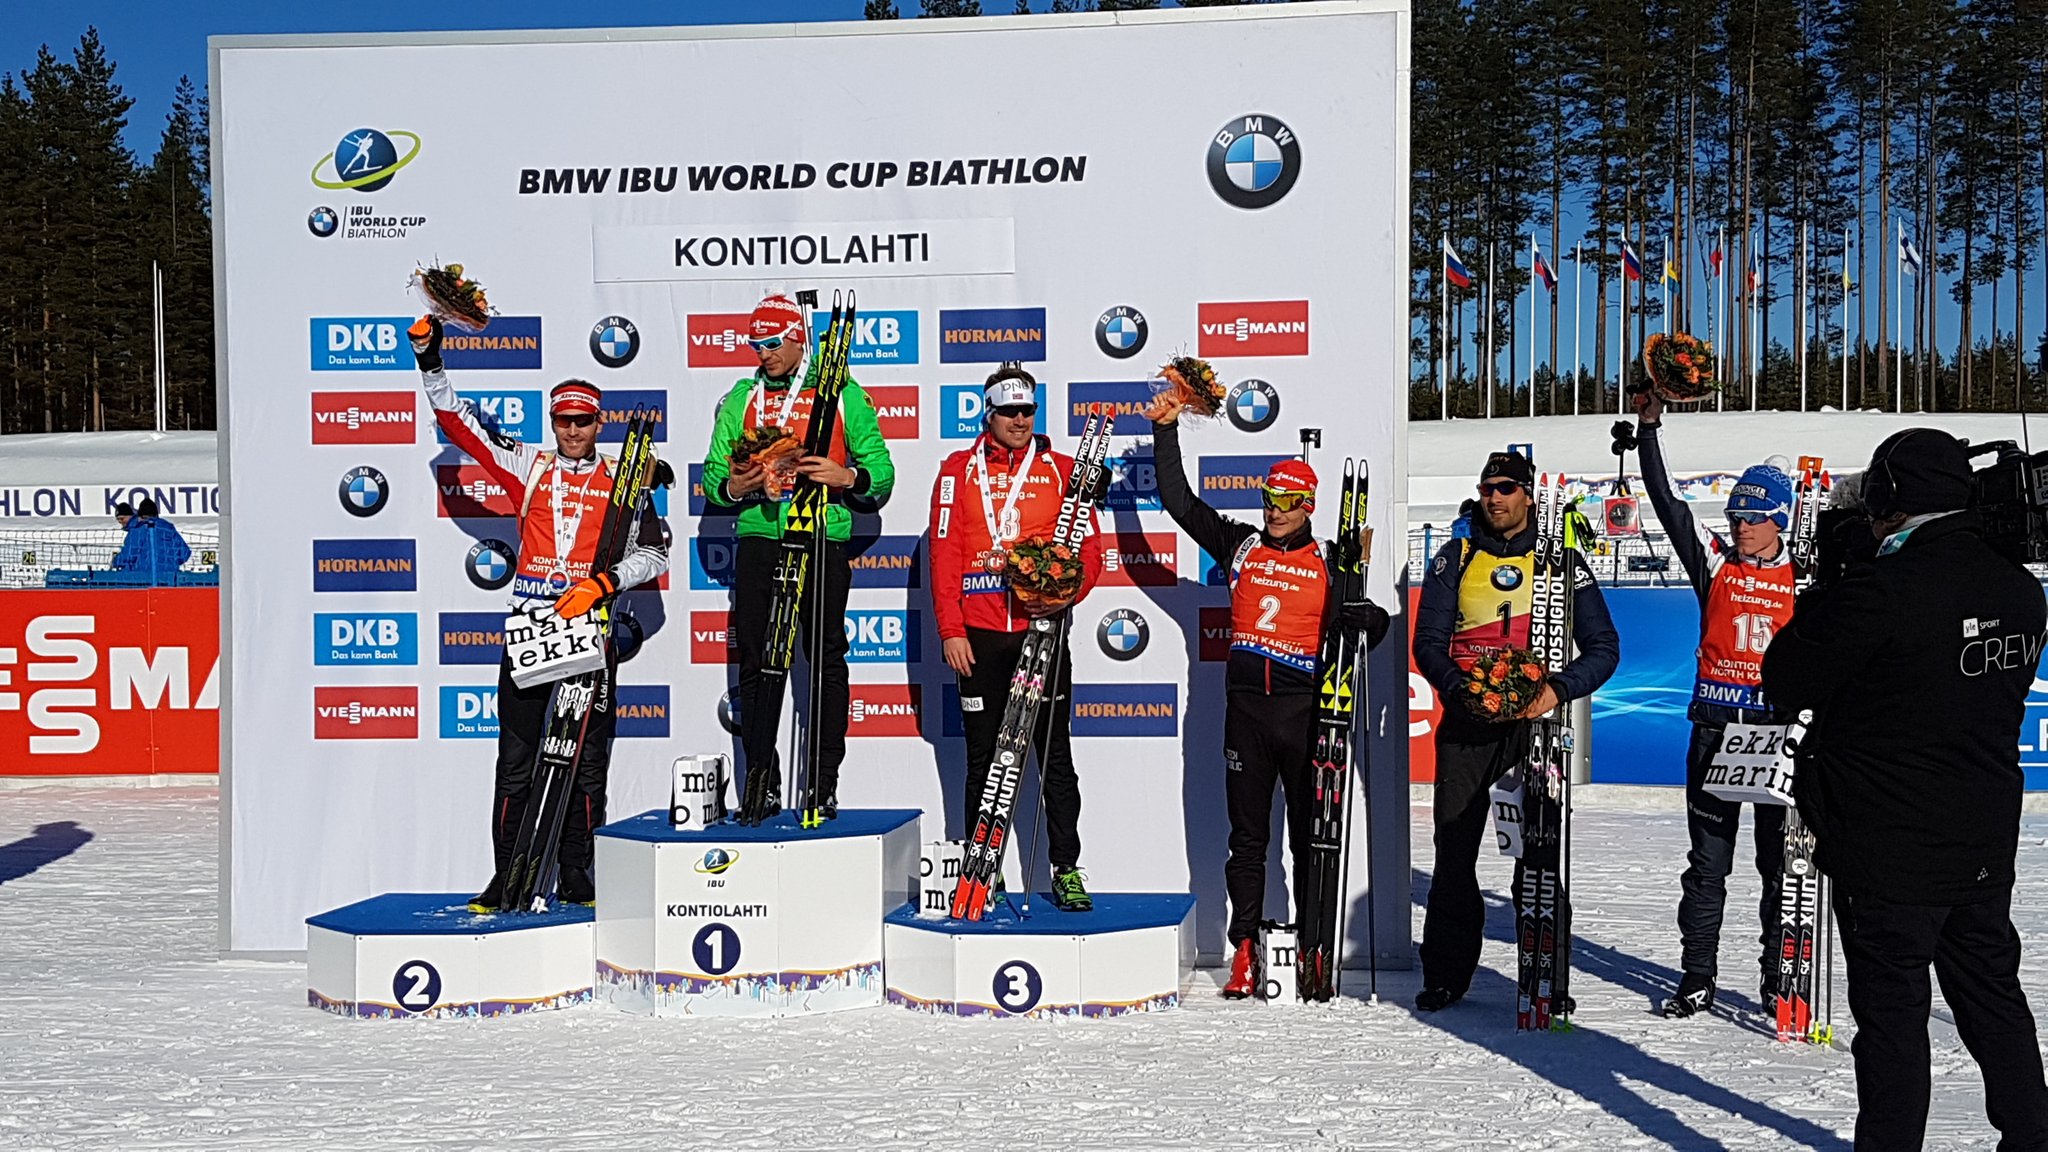 The IBU World Cup men's podium after the 12.5 k pursuit in Kontiolahti, Finland, where Arnd Peiffer of Germany outsprinted Simon Eder of Austria for the win. (Photo: IBU/Twitter)